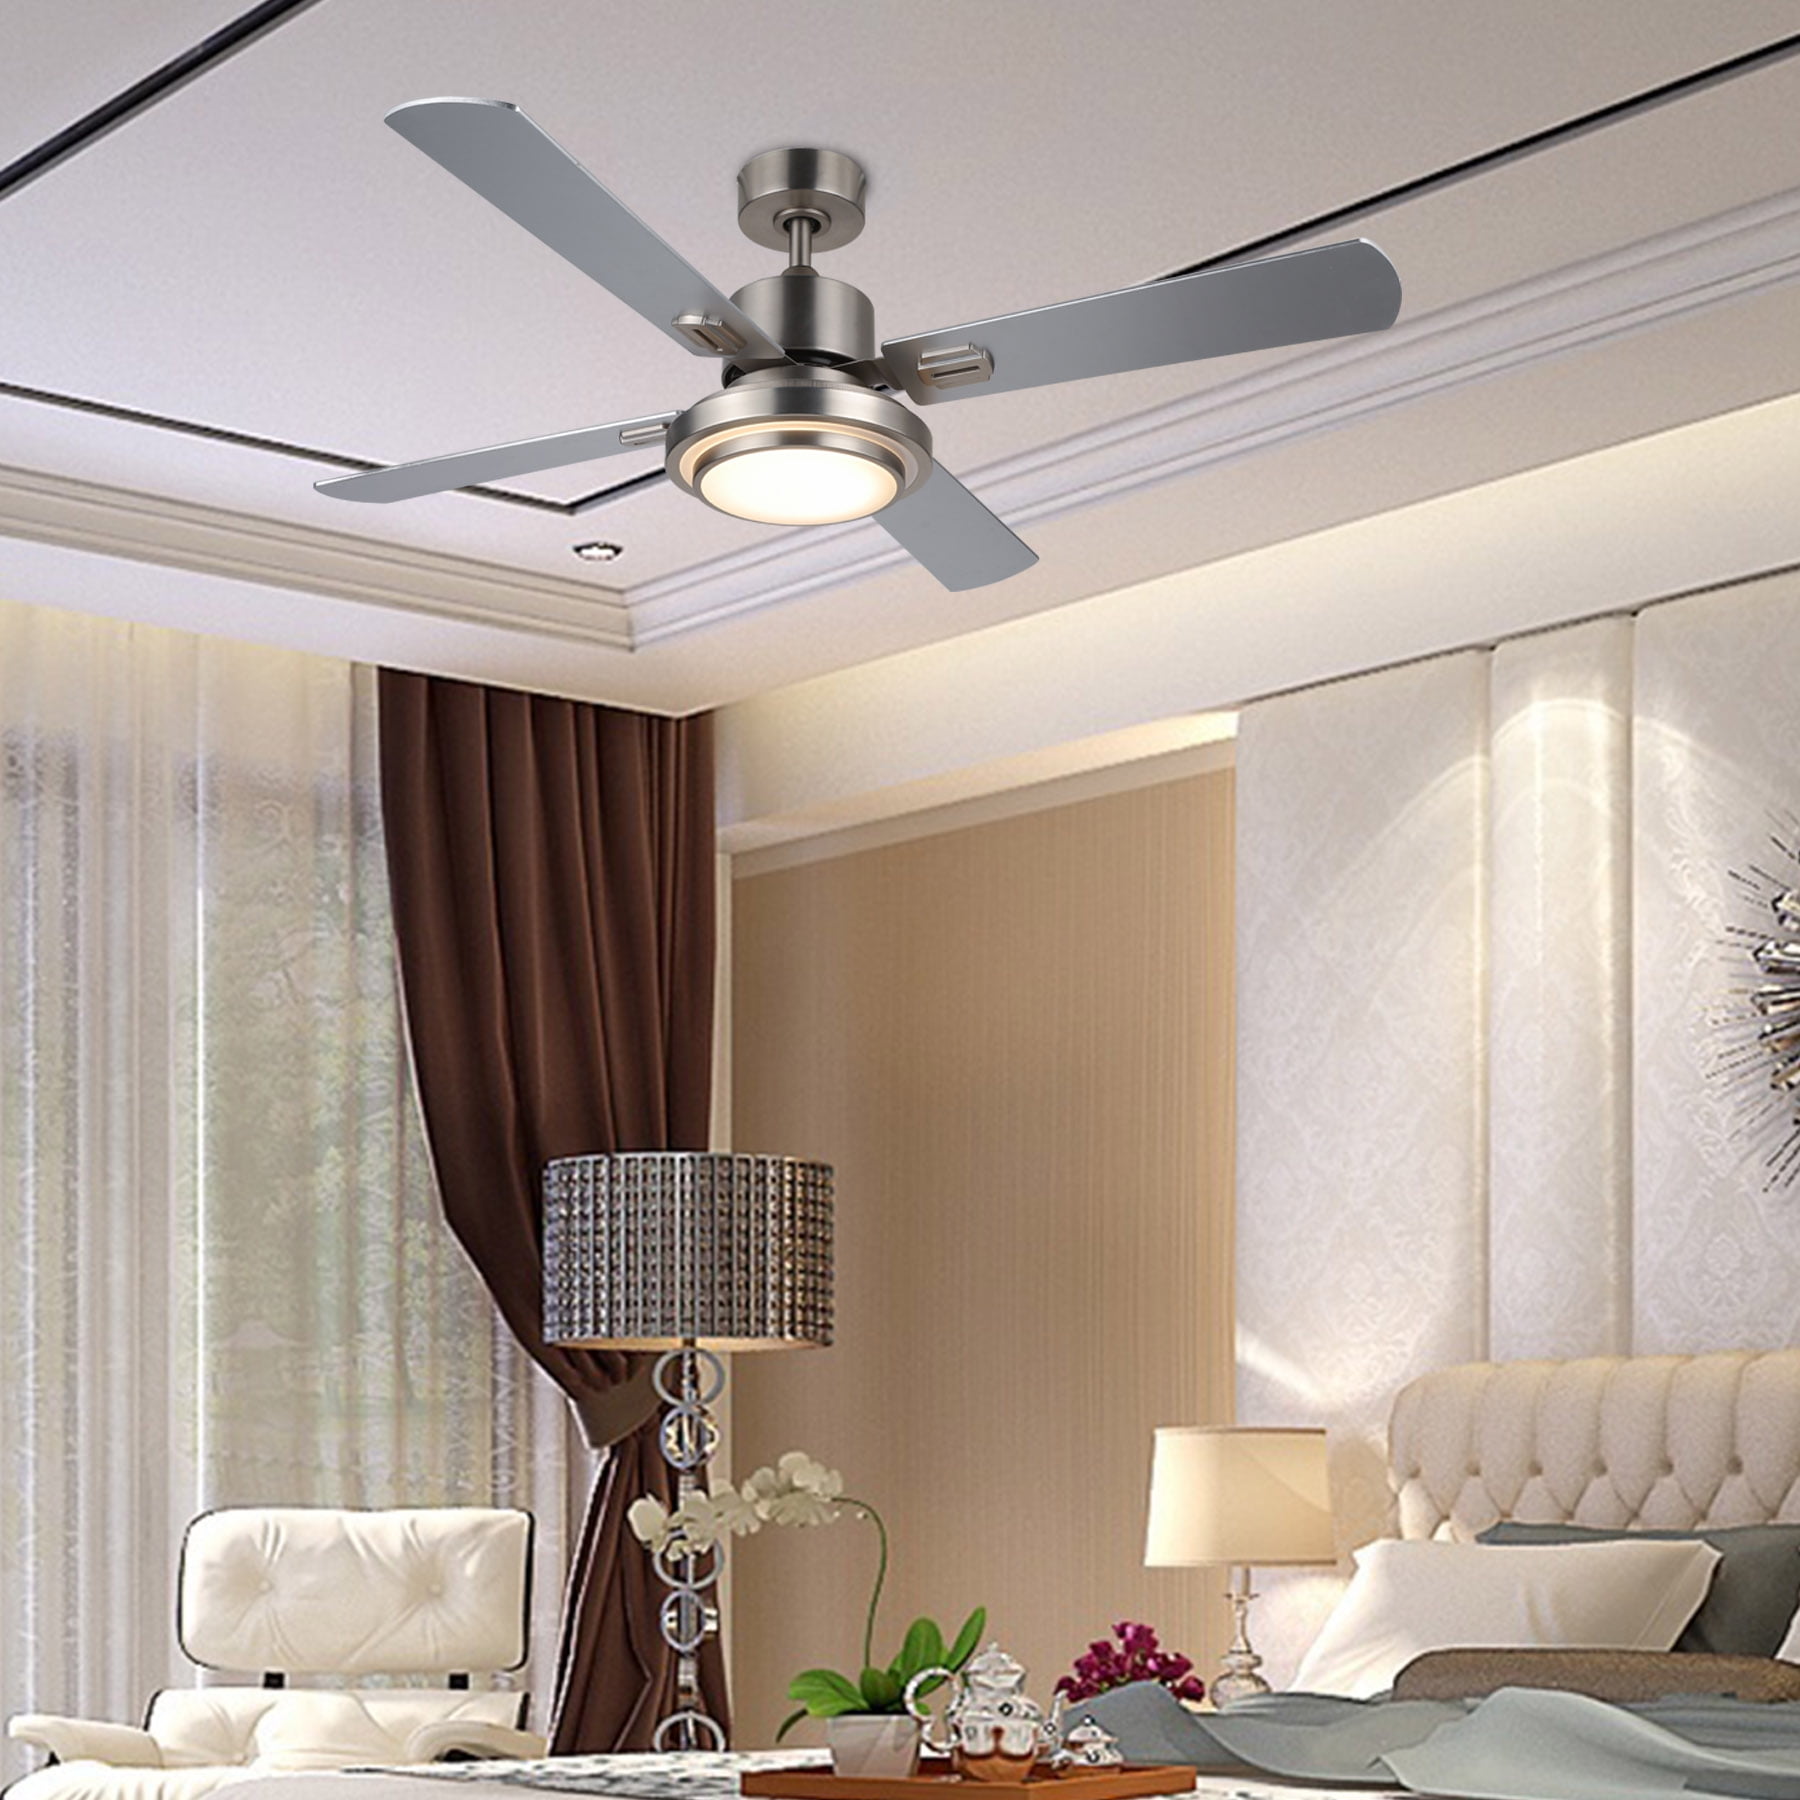 Ceiling Fan w/ LED Panel Light&Remote Control Brushed Nickel Finish Indoor 